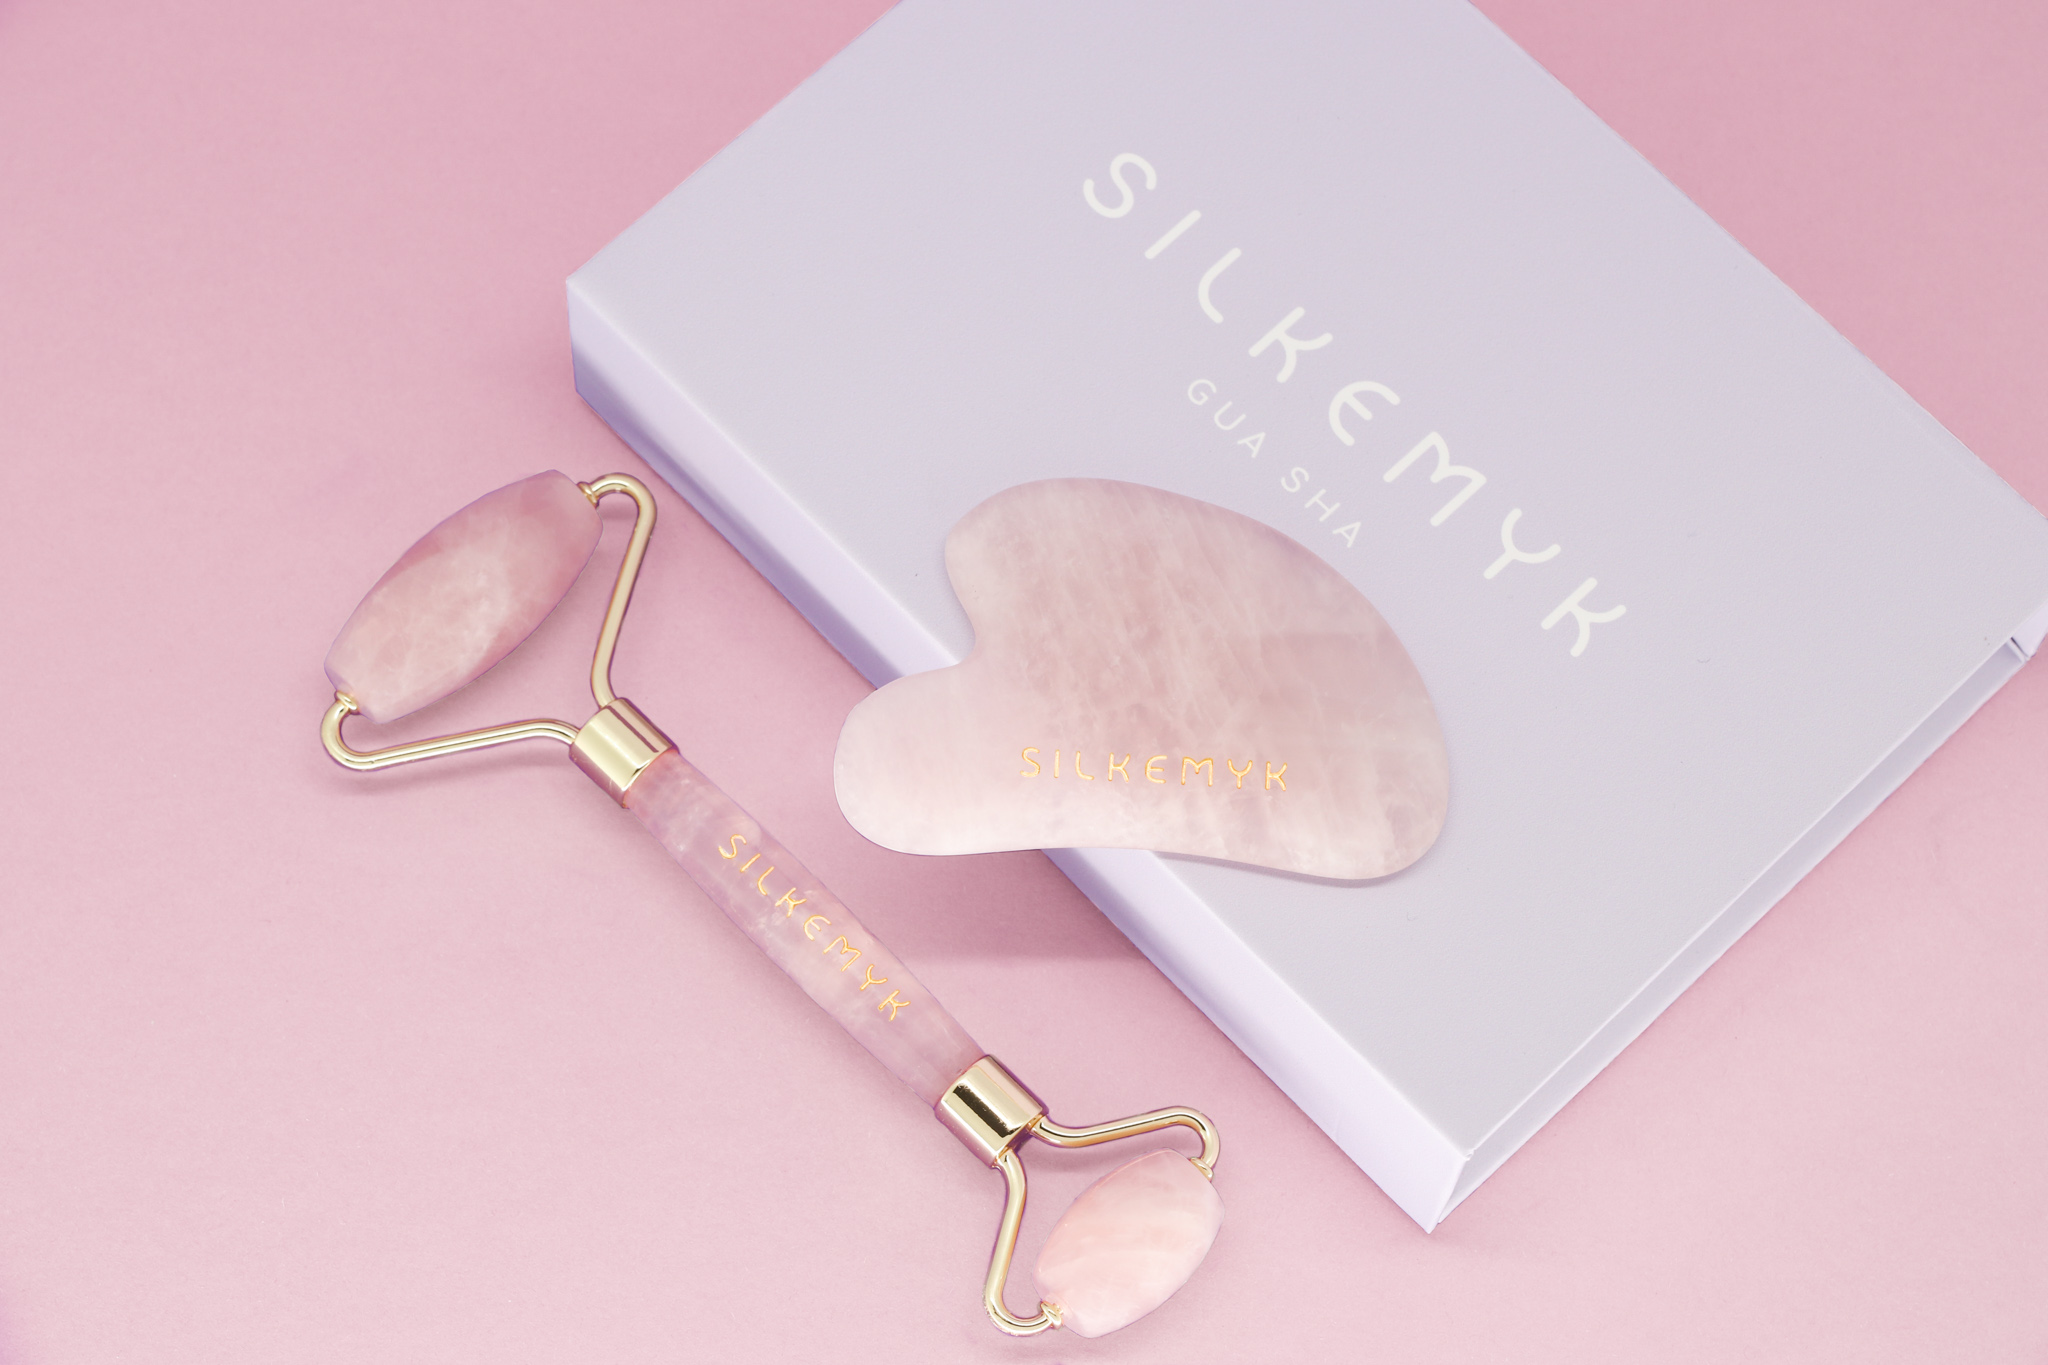 Gua Sha set from Silkemyk to reduce acne, wrinkles and rosacea